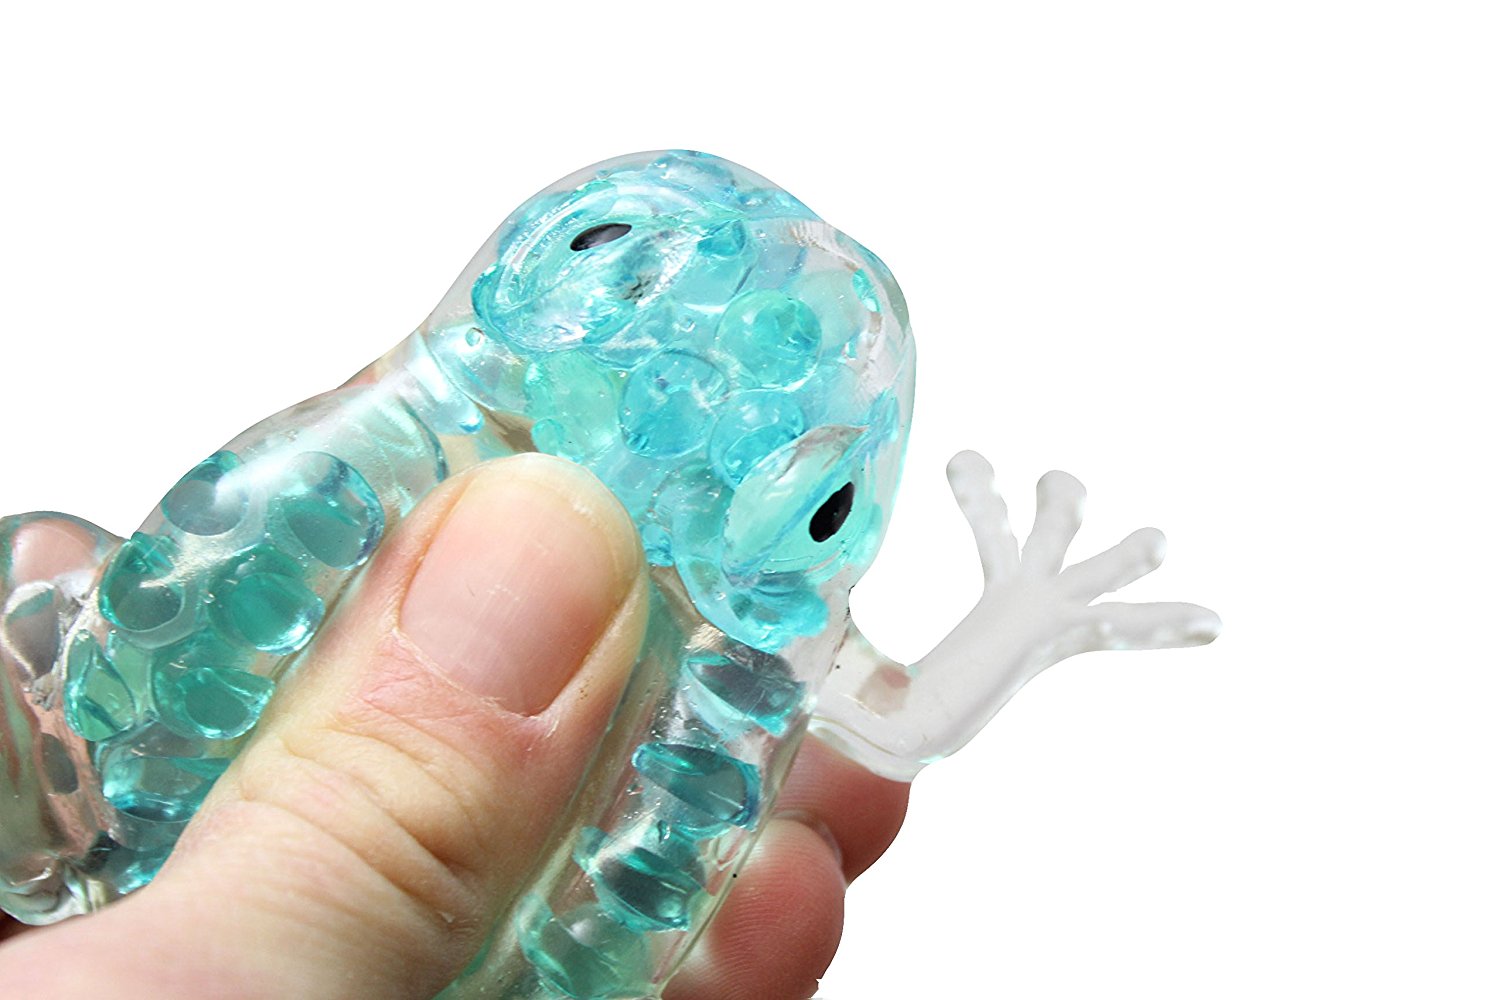 TEAL Frog Stress Ball - Small Cute Squishy Toy for UK